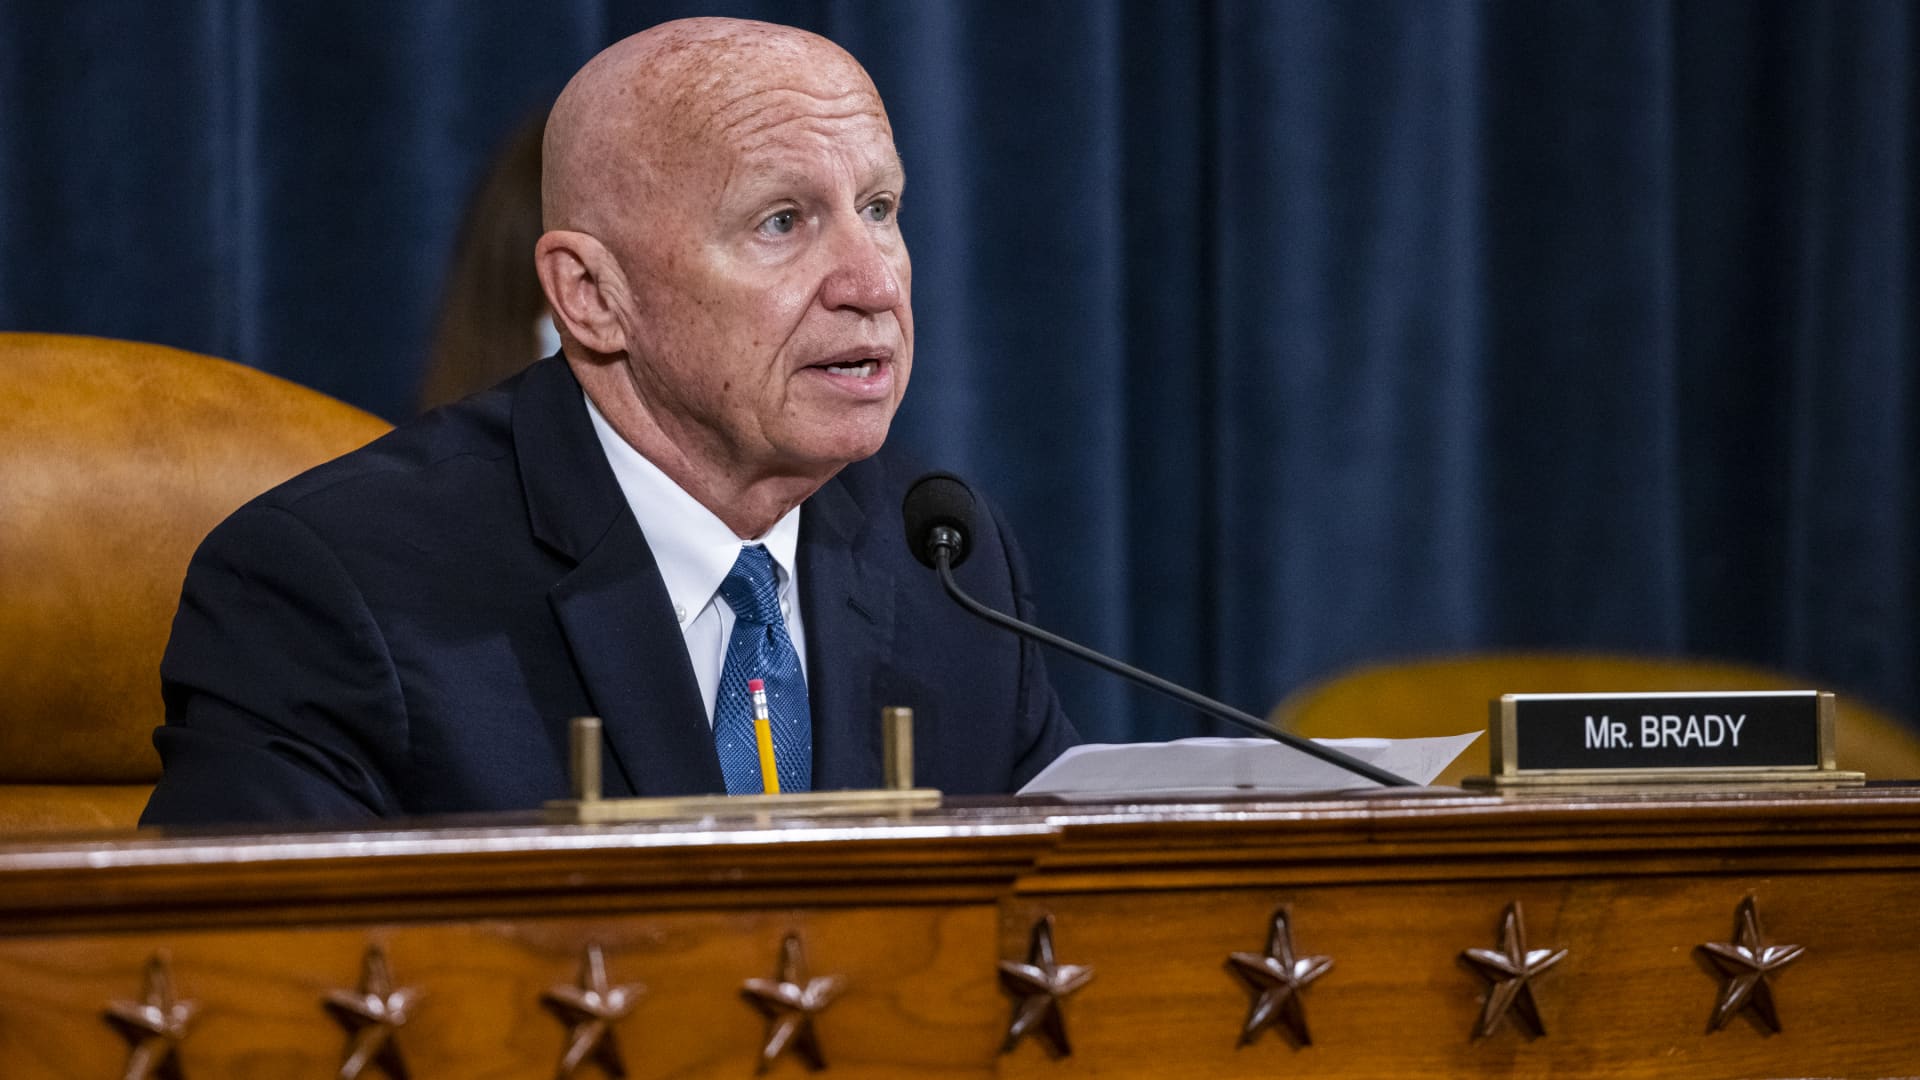 Rep. Kevin Brady, R-Texas, ranking member of the House Ways and Means Committee, speaks during a markup of the Build Back Better Act in Washington, D.C., on Sept. 9, 2021.